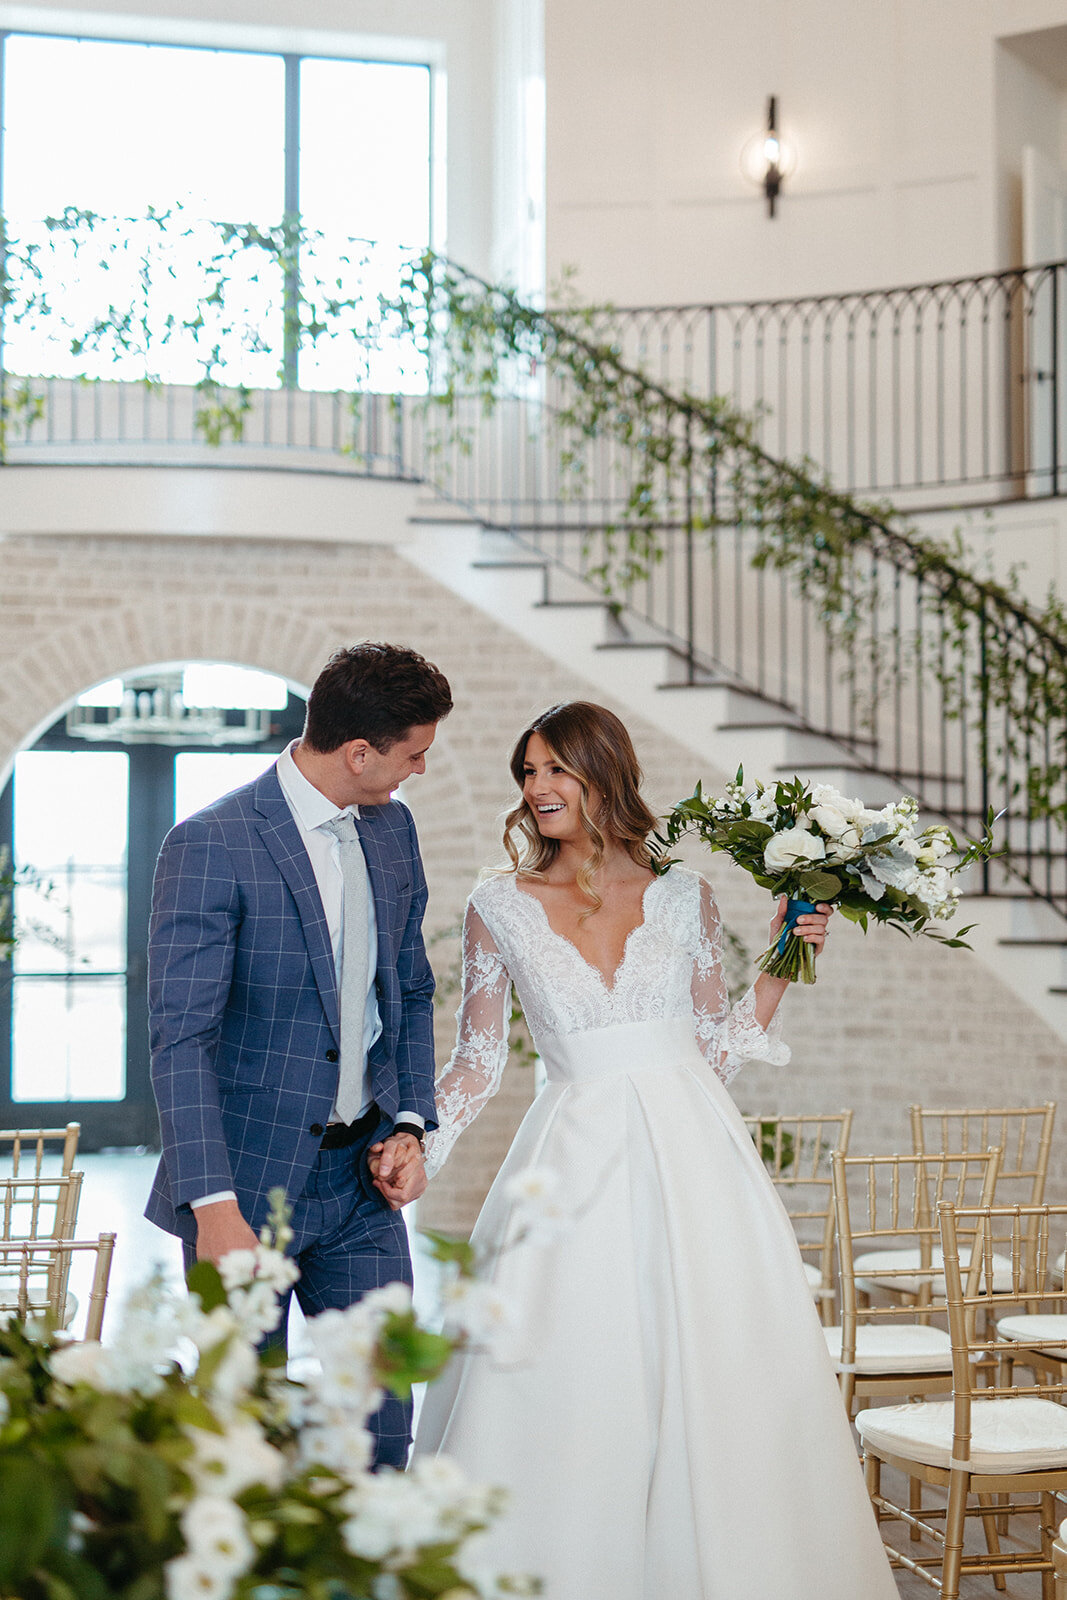 Bride and groom in  blue suit and white wedding gown walk down the aisle in a bright and airy room with gold chairs.